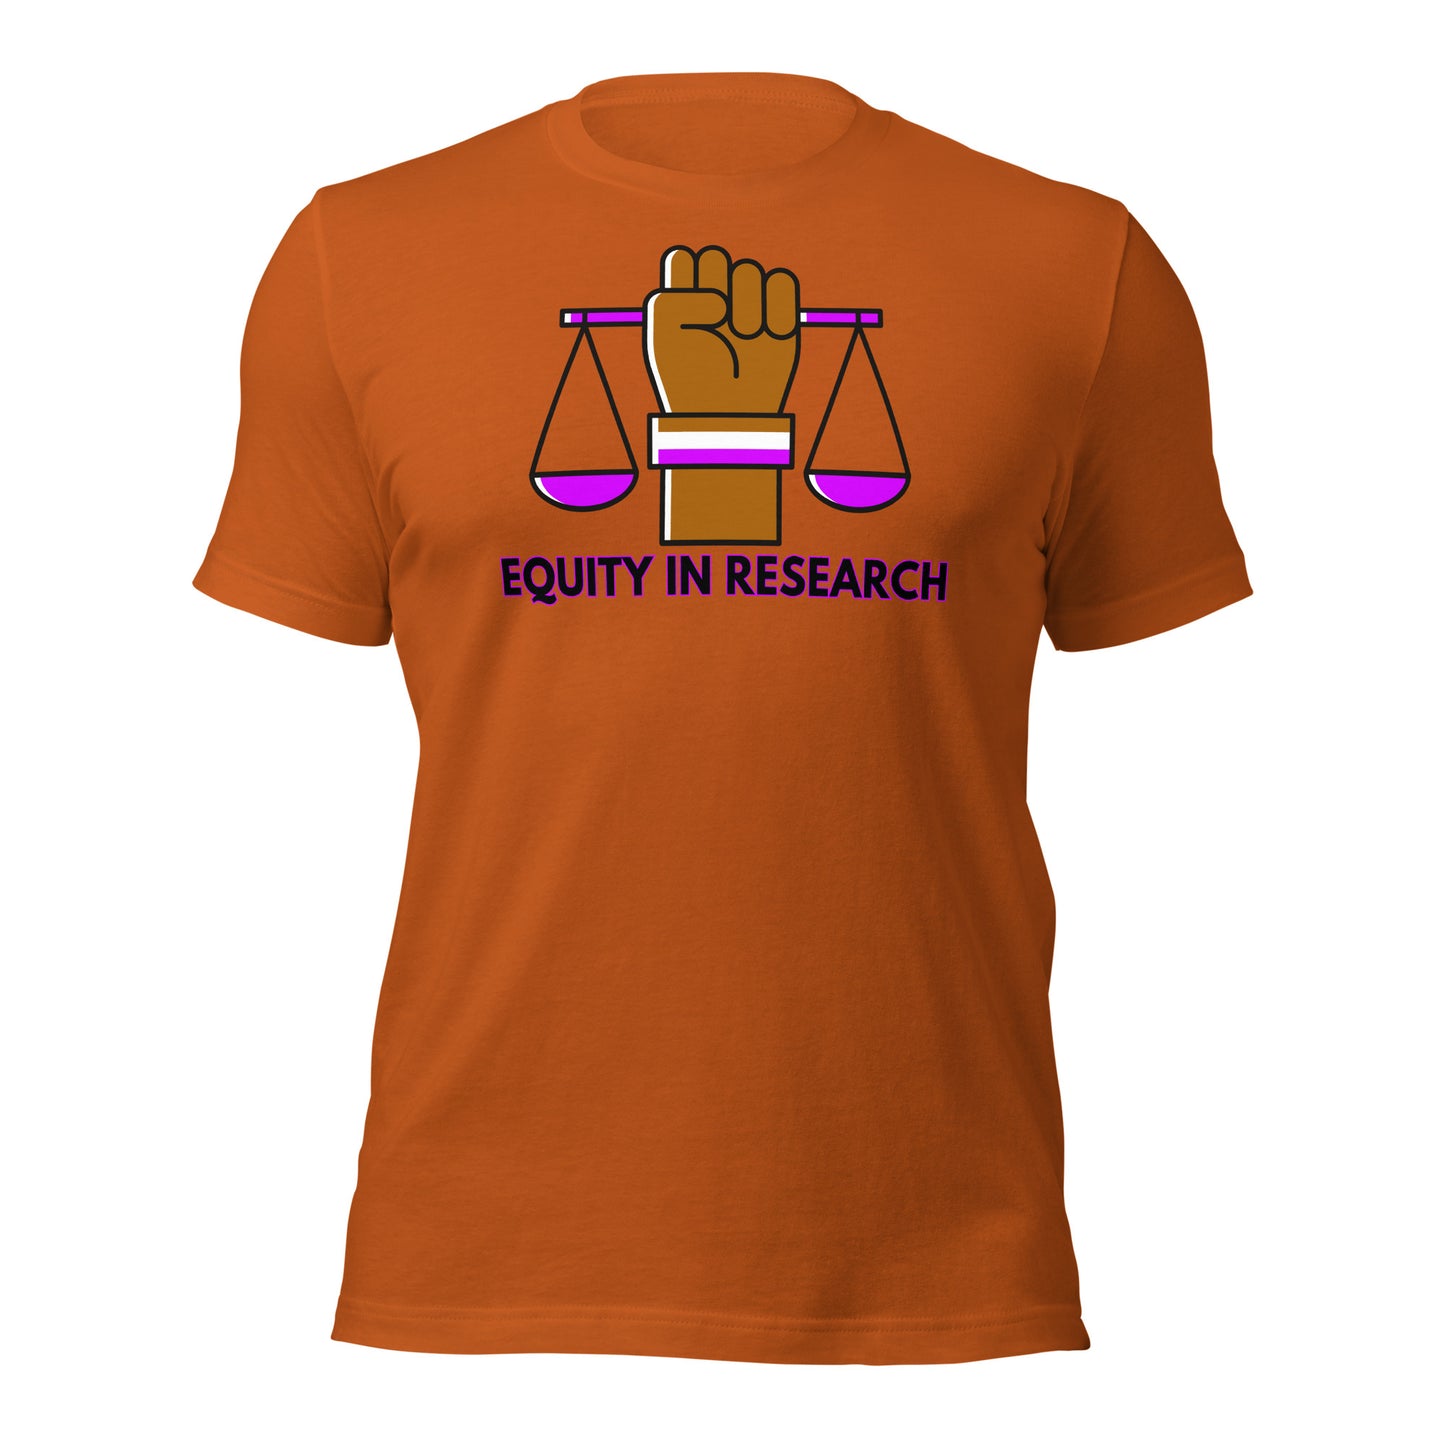 EQUITY in RESEARCH: Unisex t-shirt